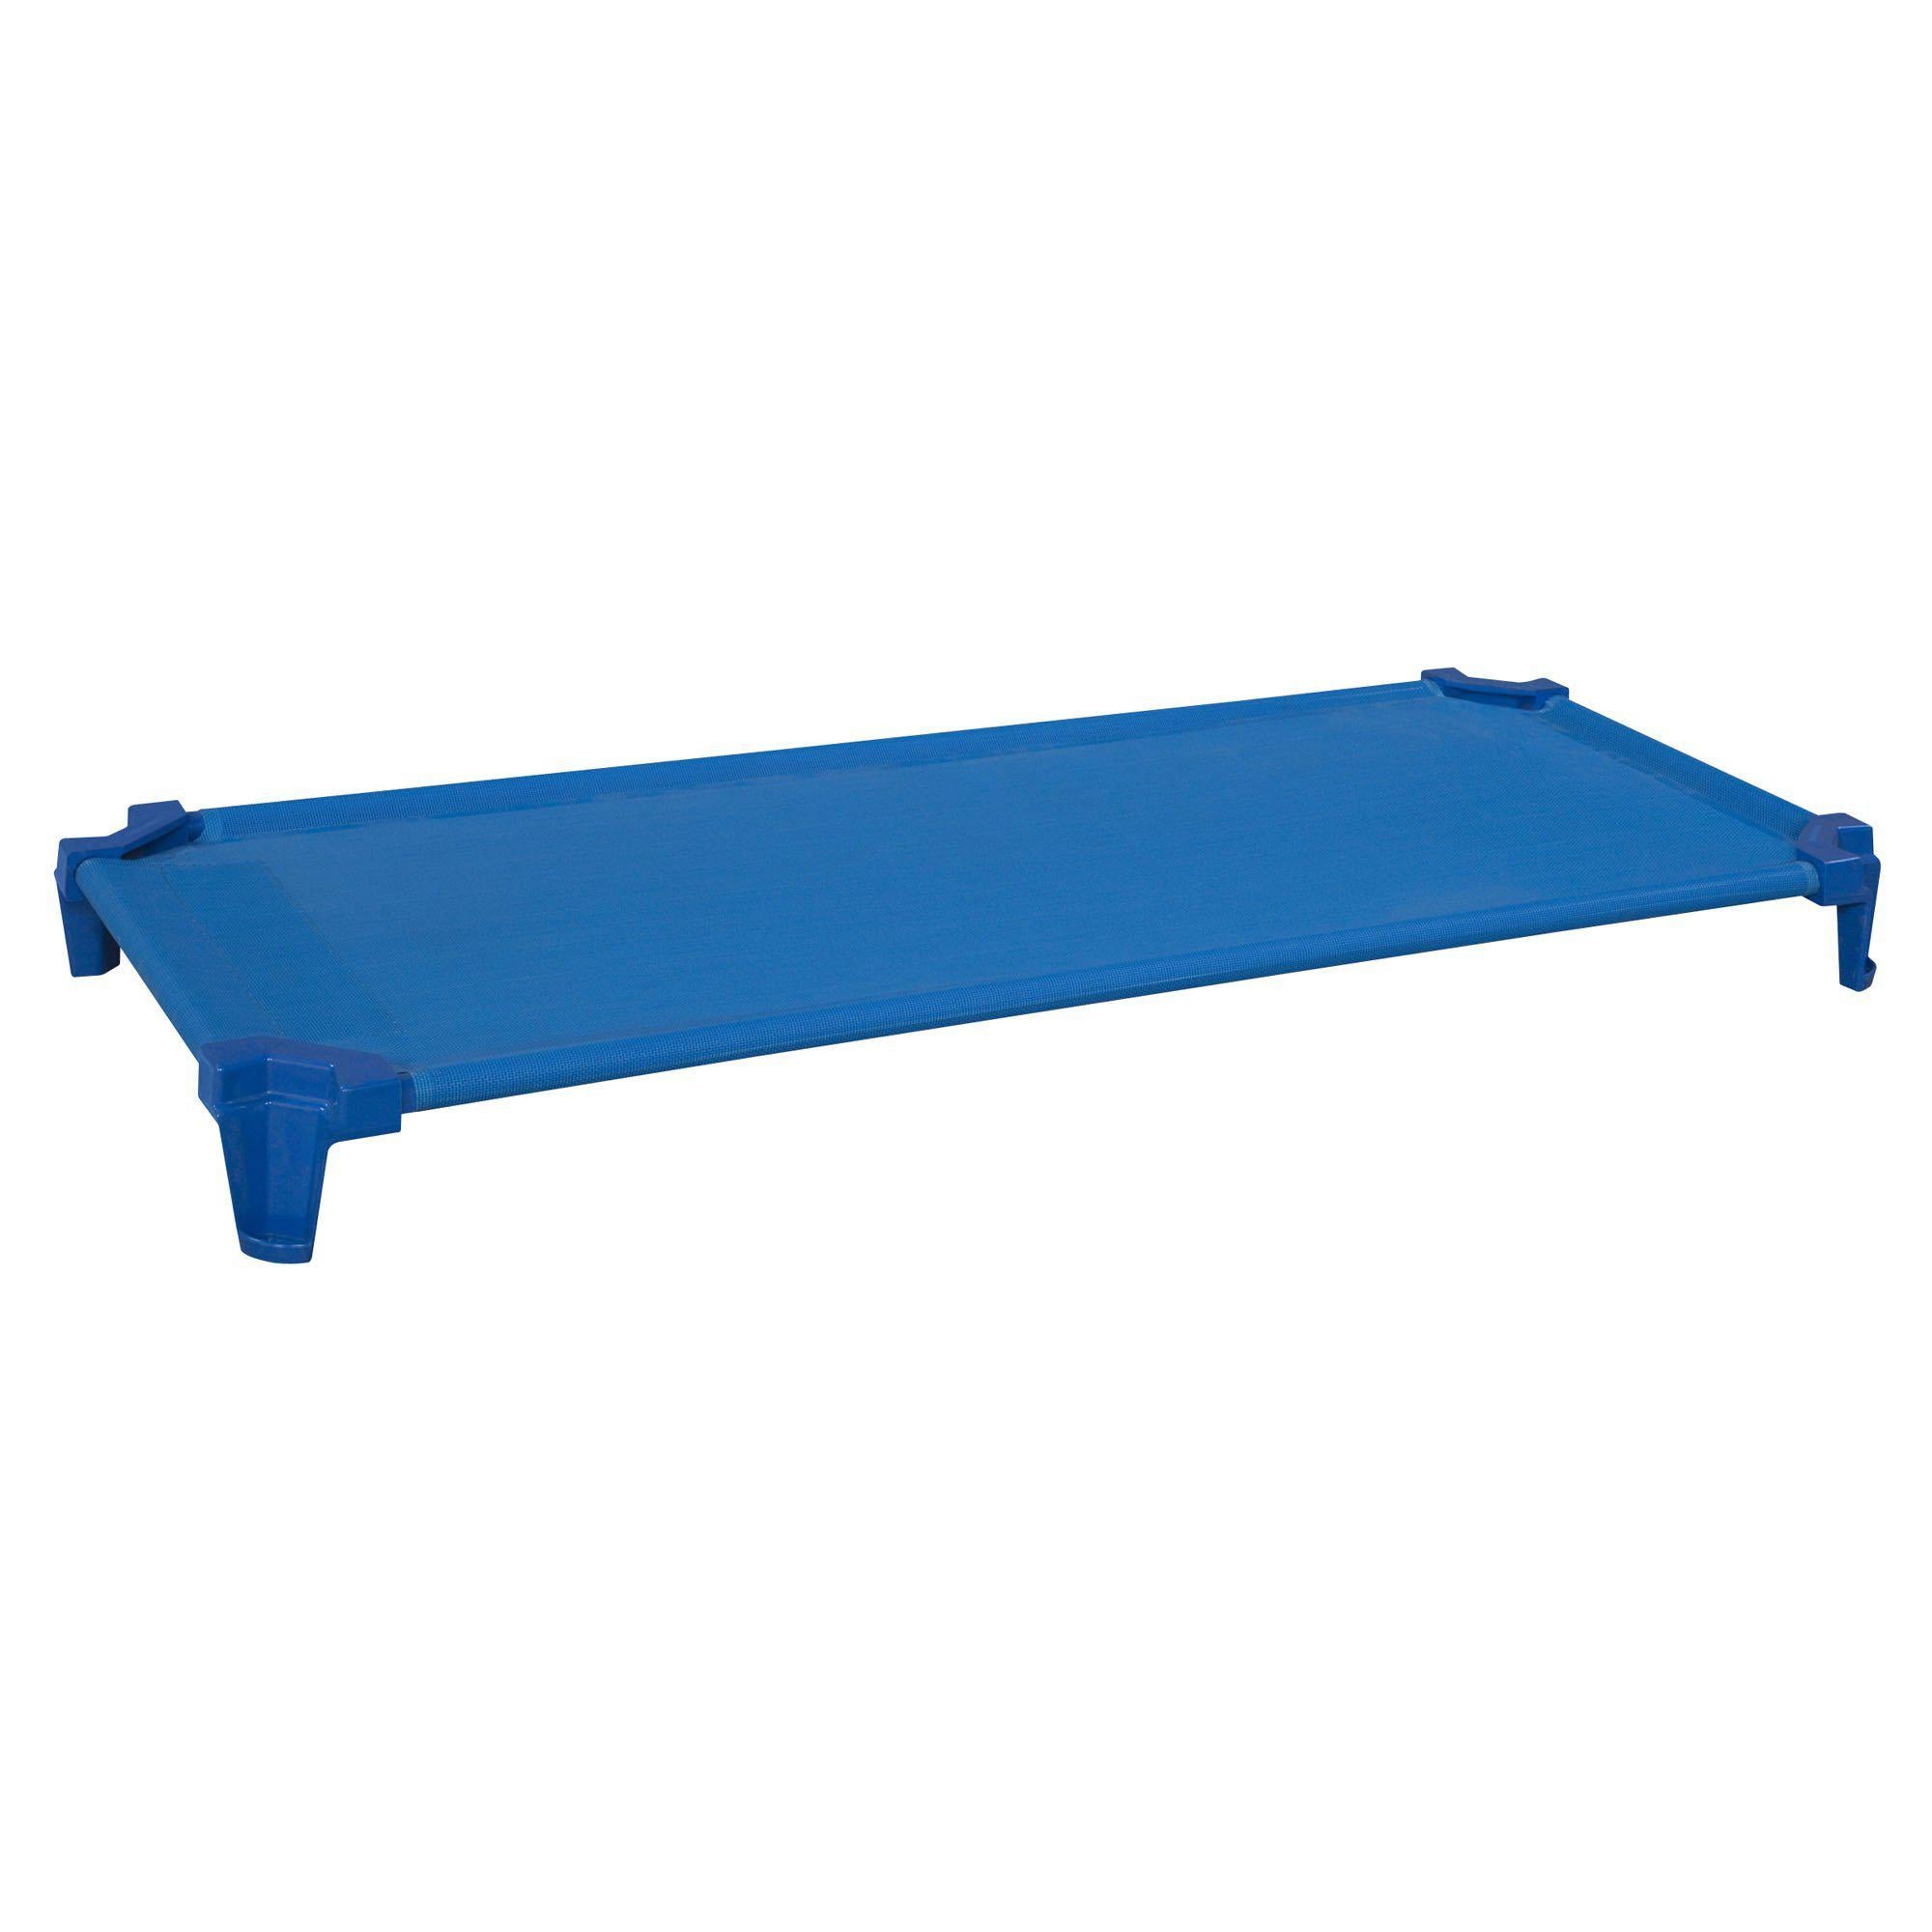 Incredible Cot Single Pack of (1) Factory Assembled, Blue